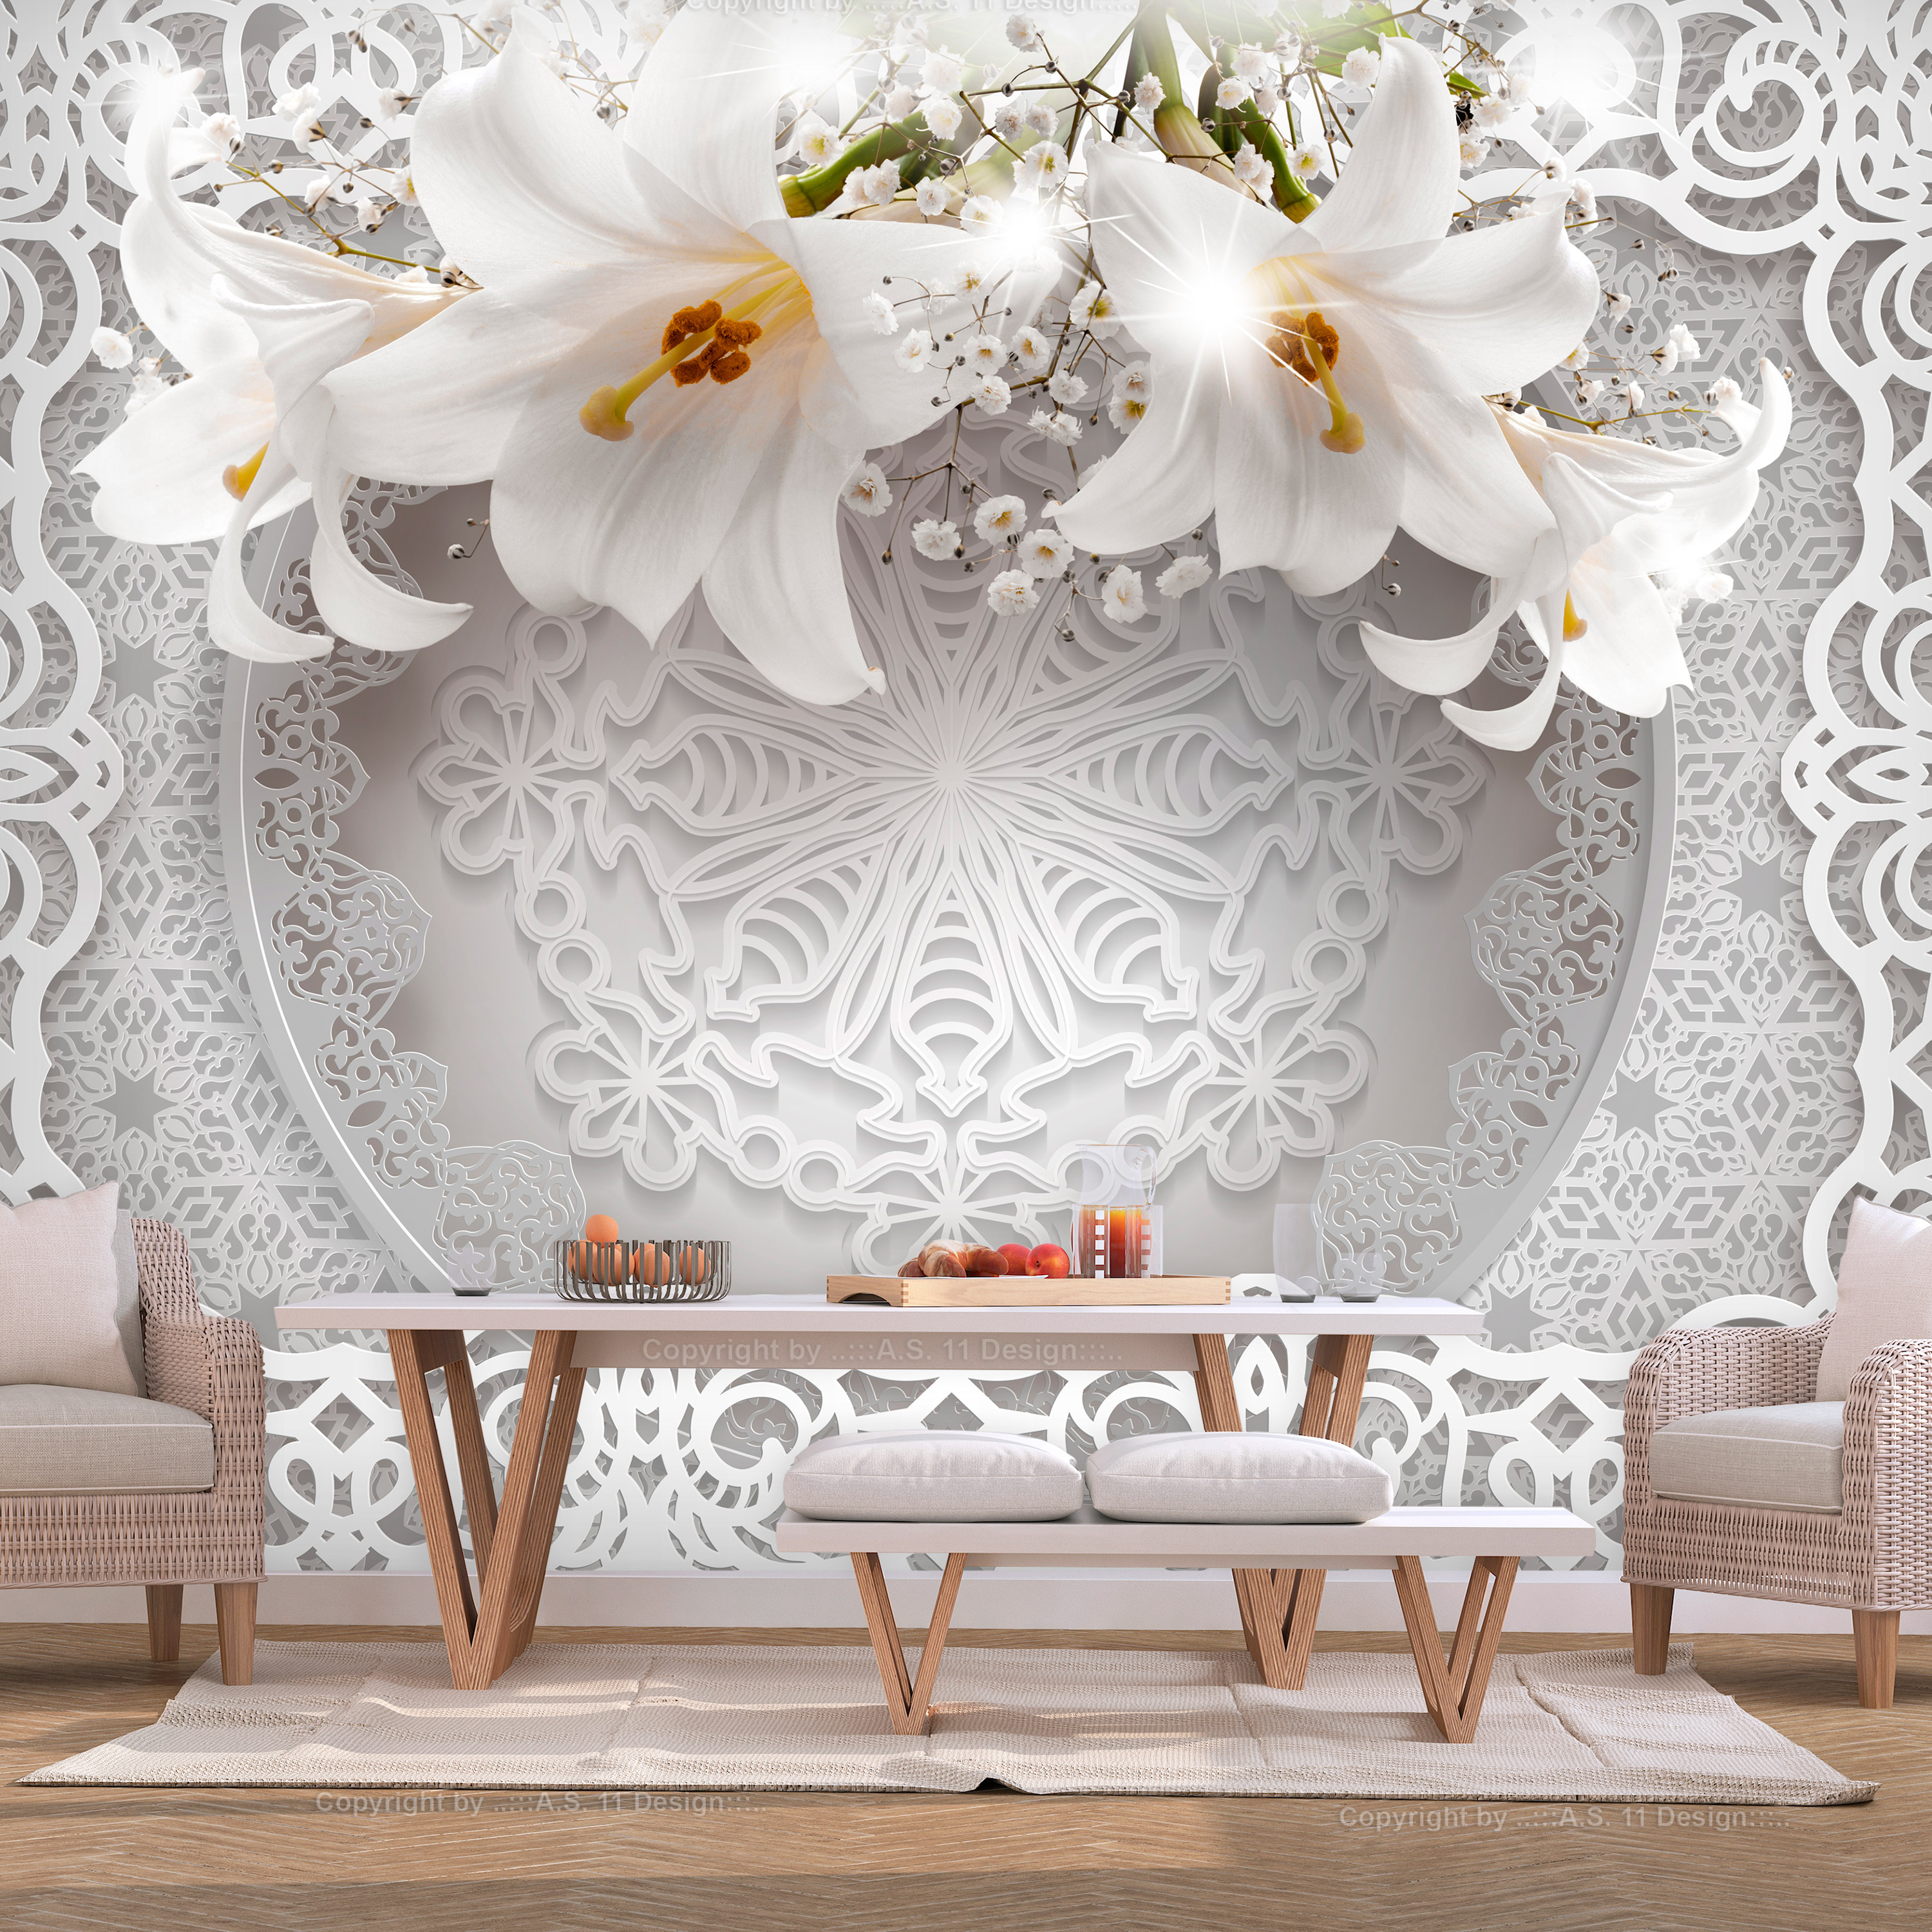 Self-adhesive Wallpaper - Lilies and Ornaments - 294x210